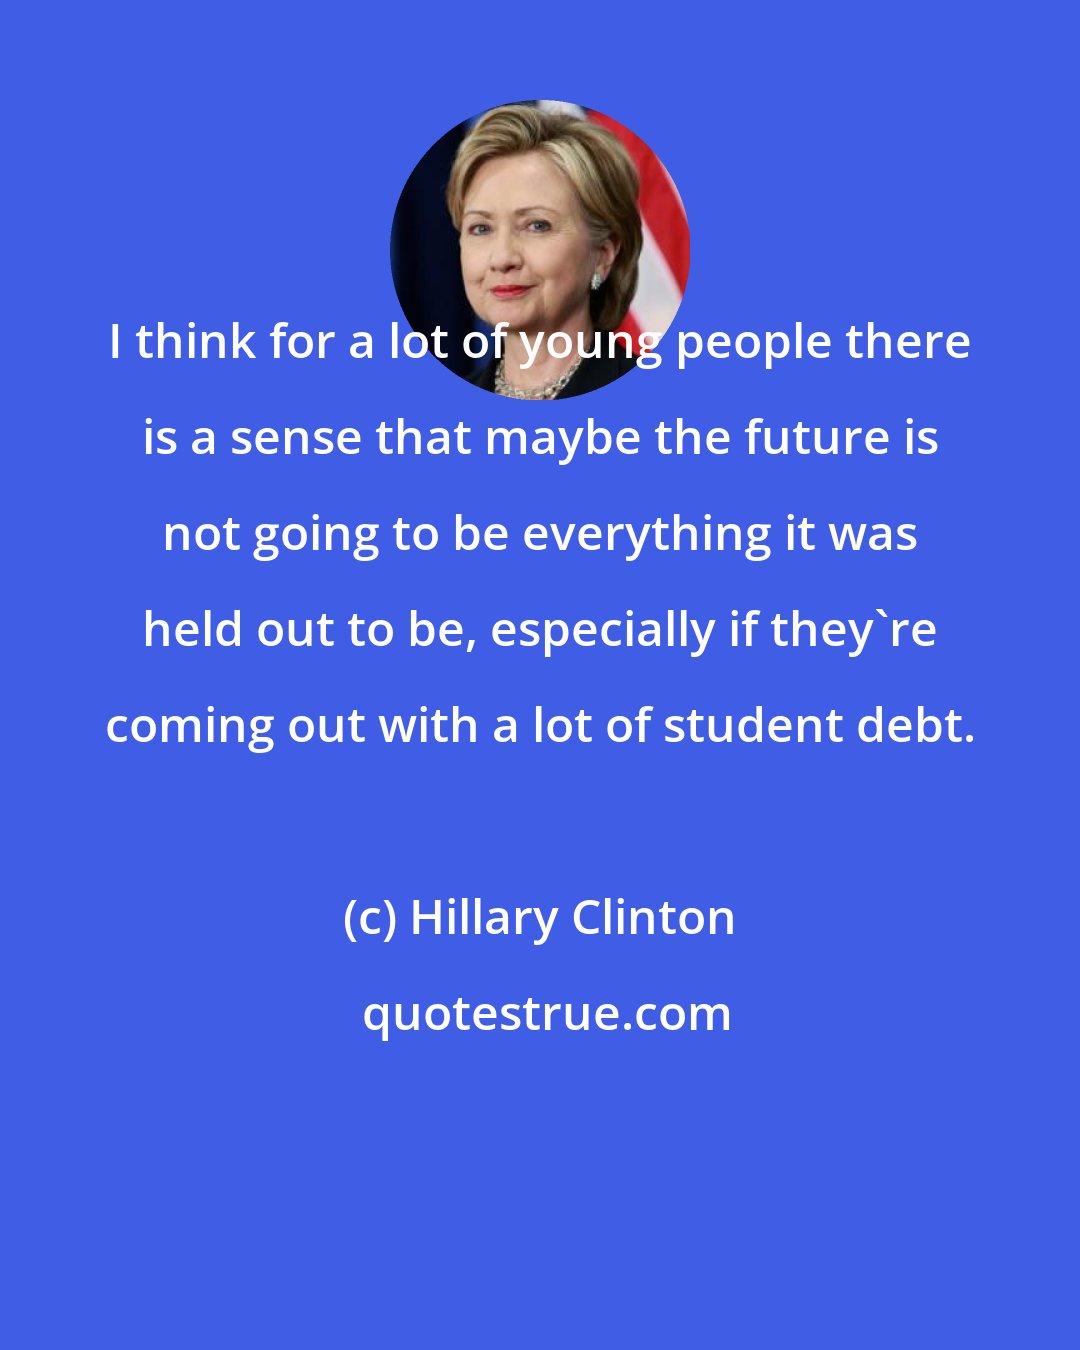 Hillary Clinton: I think for a lot of young people there is a sense that maybe the future is not going to be everything it was held out to be, especially if they're coming out with a lot of student debt.